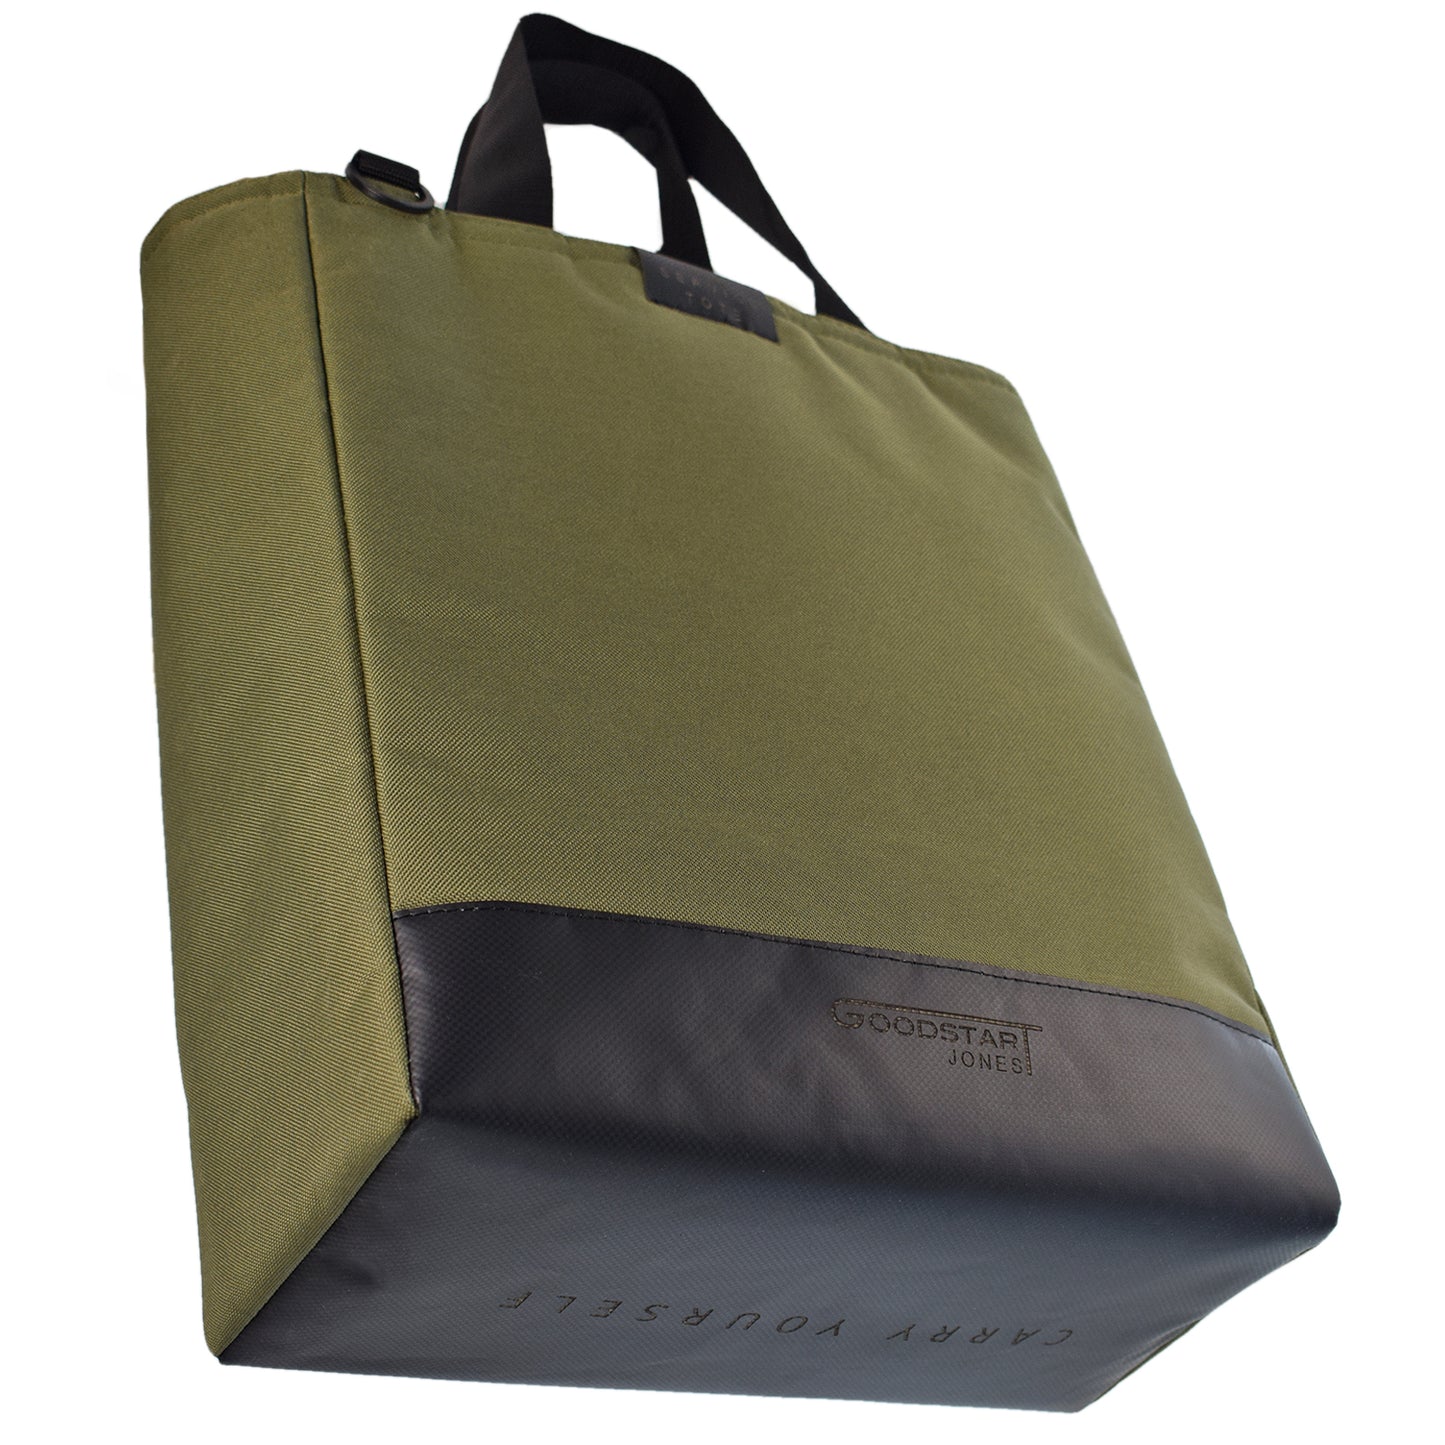 Padded Service Tote Bag | OLIVE GREEN